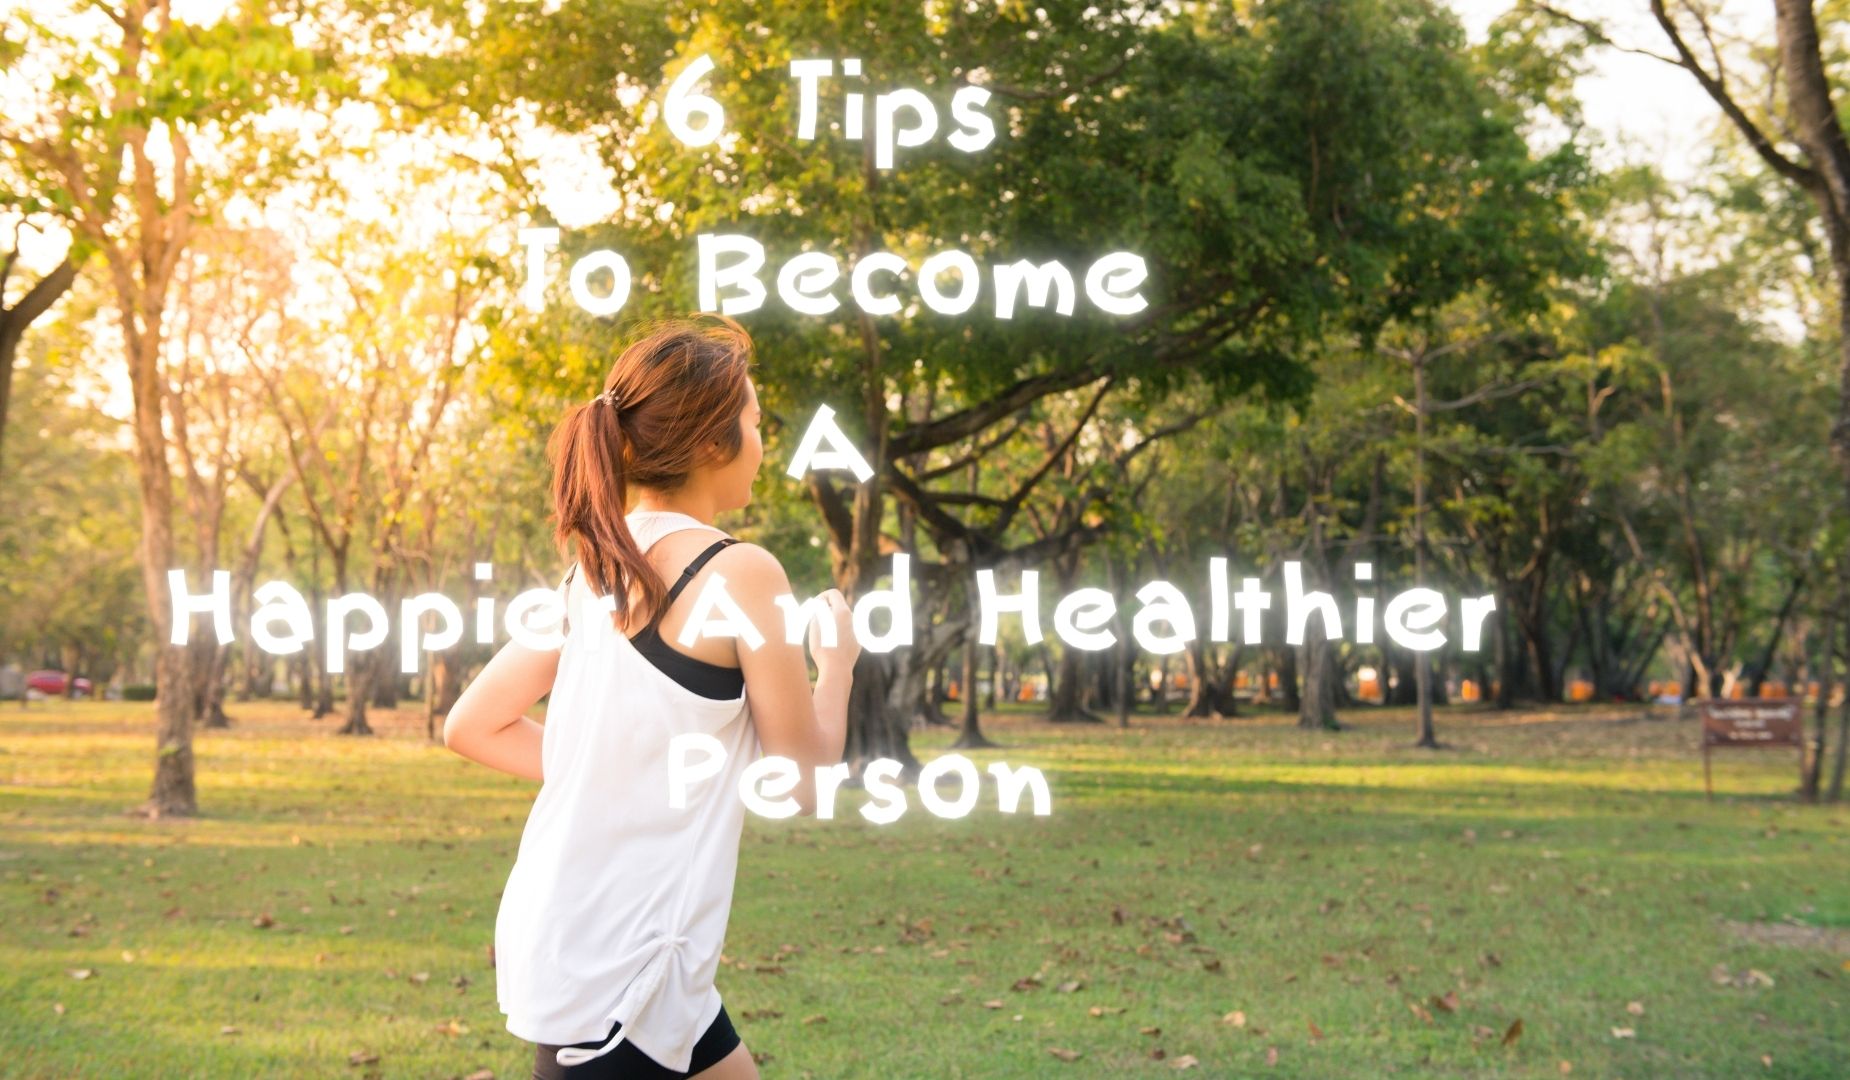 6 Tips To Become A Happier And Healthier Person